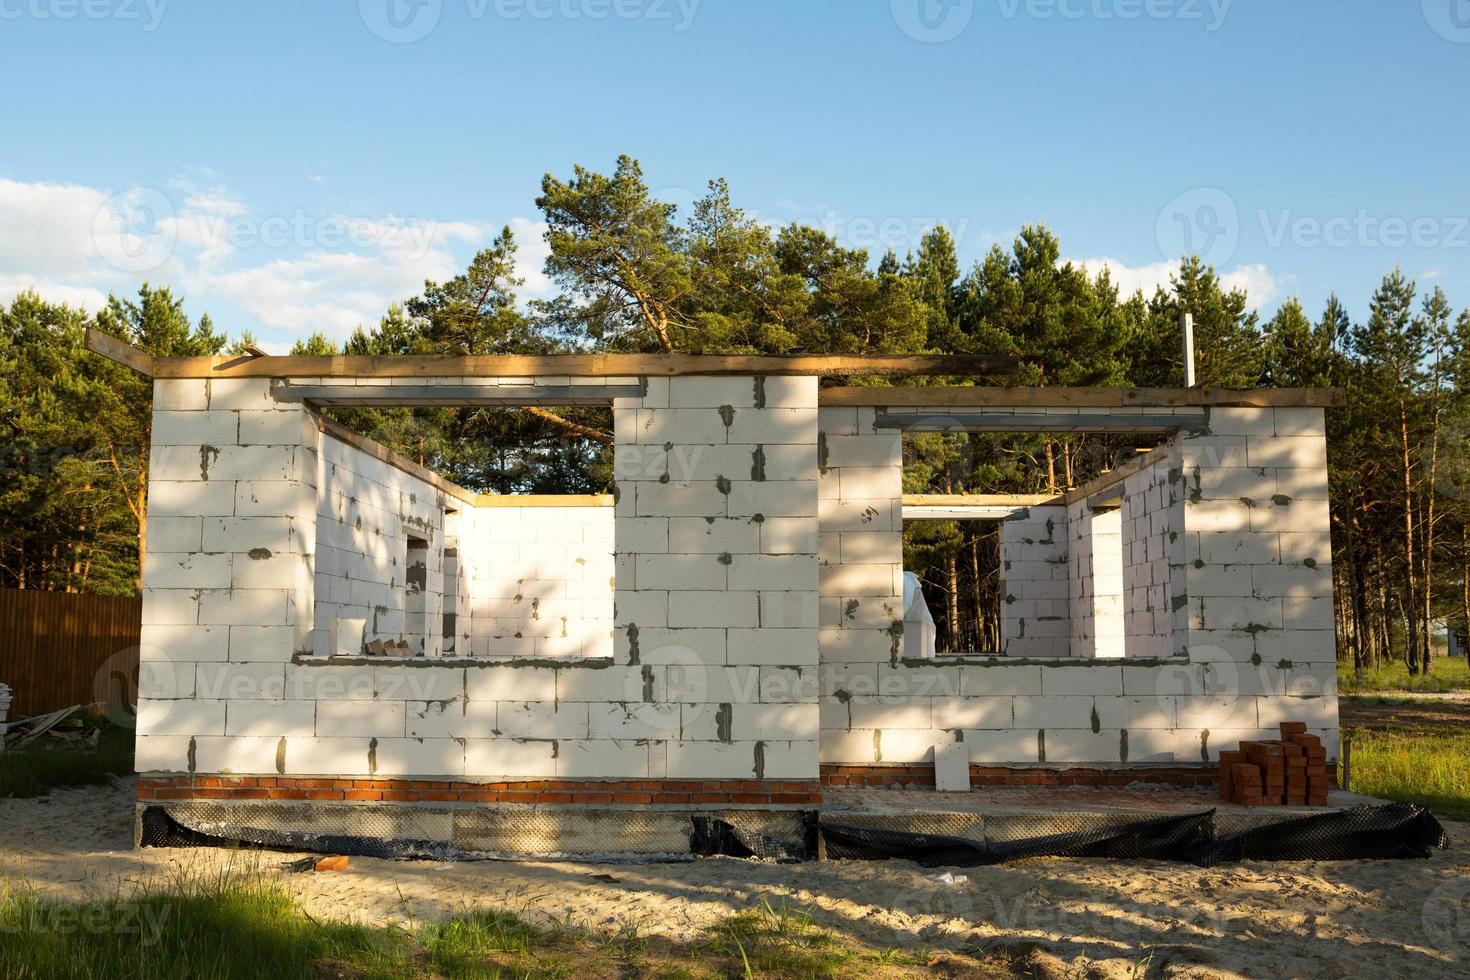 The object of unfinished construction is a future house made of a porous concrete block. 1st floor with an attic. Housing in rural areas is under construction. Walls with windows photo